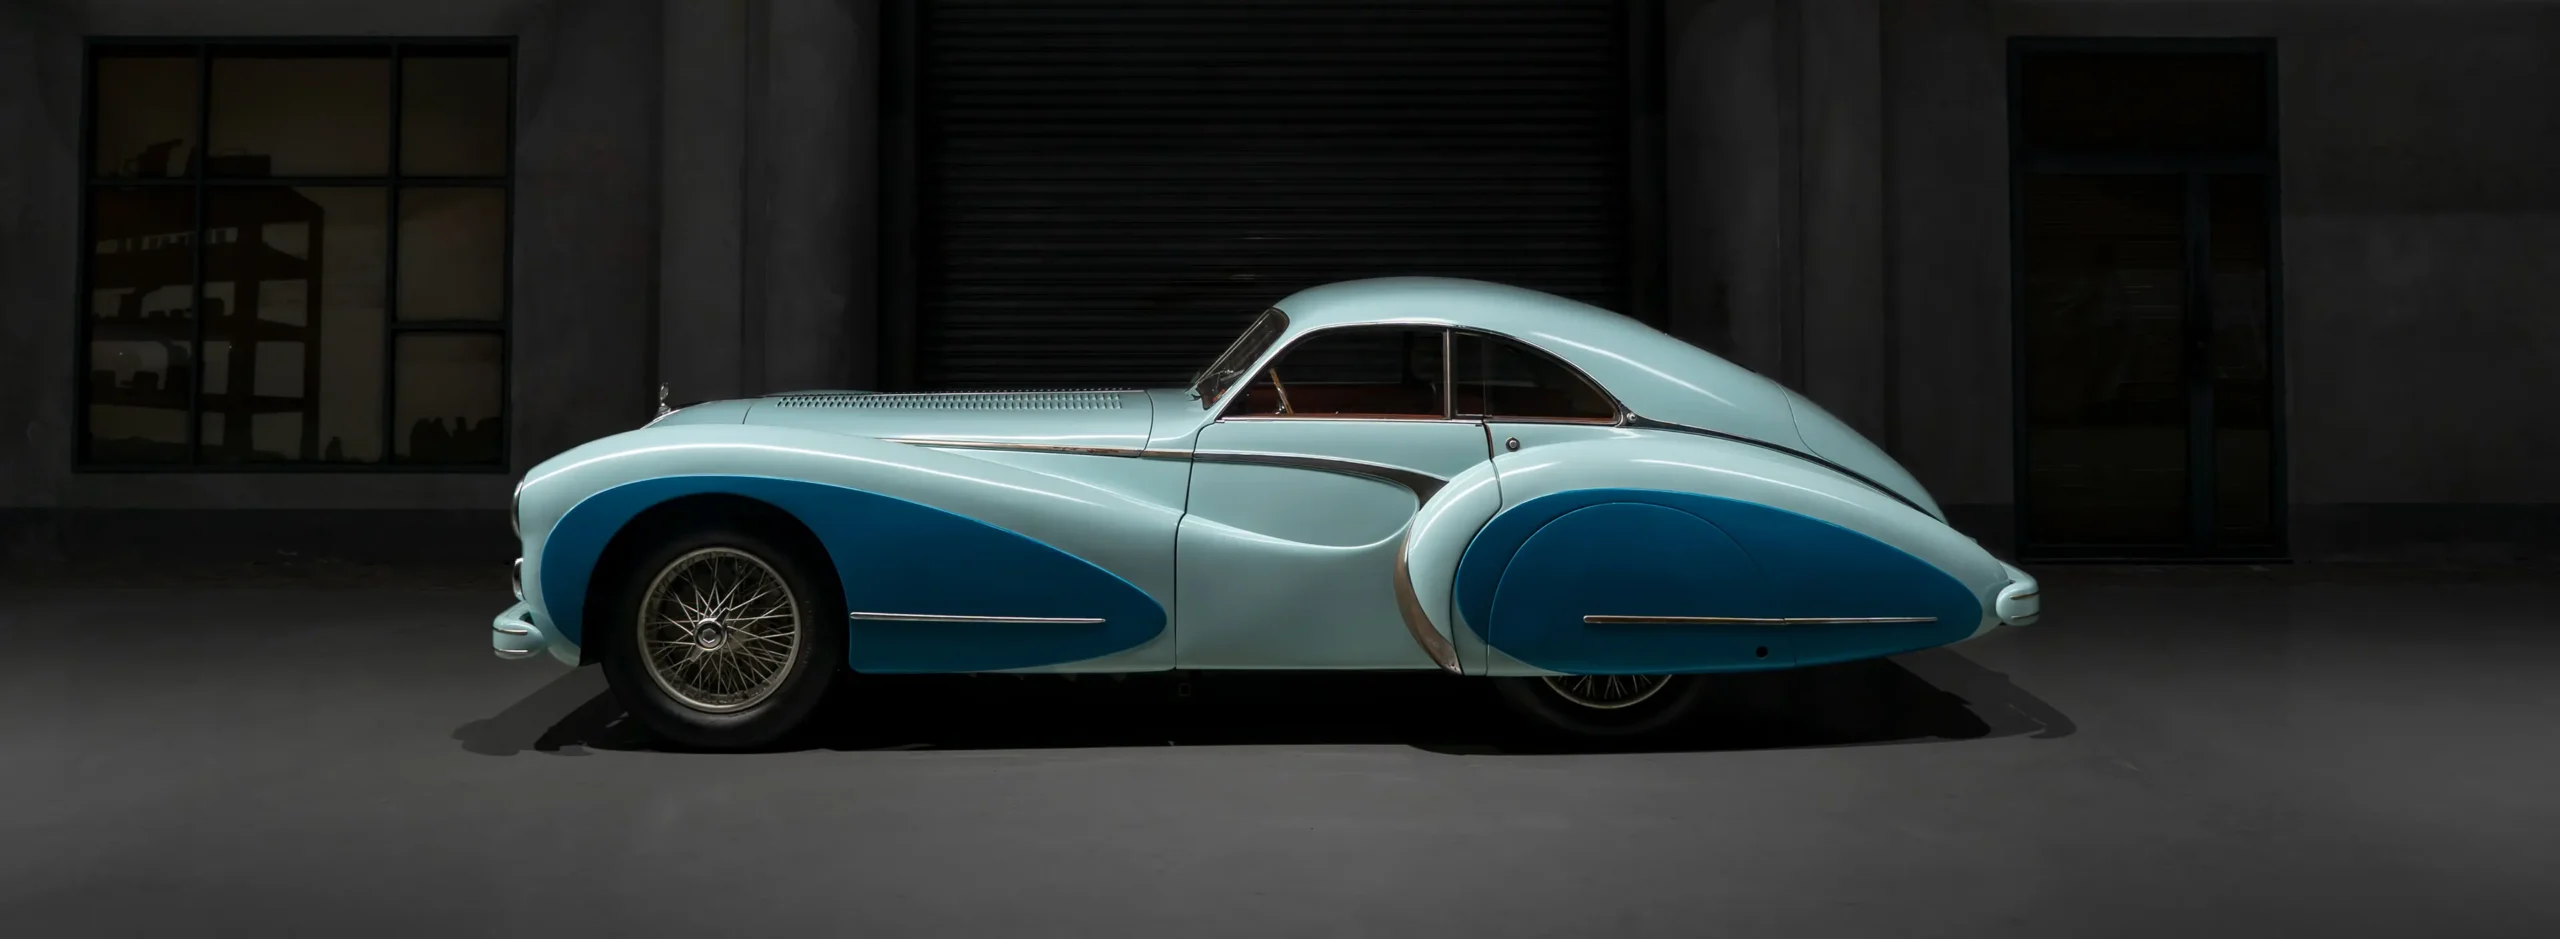 talbot lago t26 grand sport coupe scaled